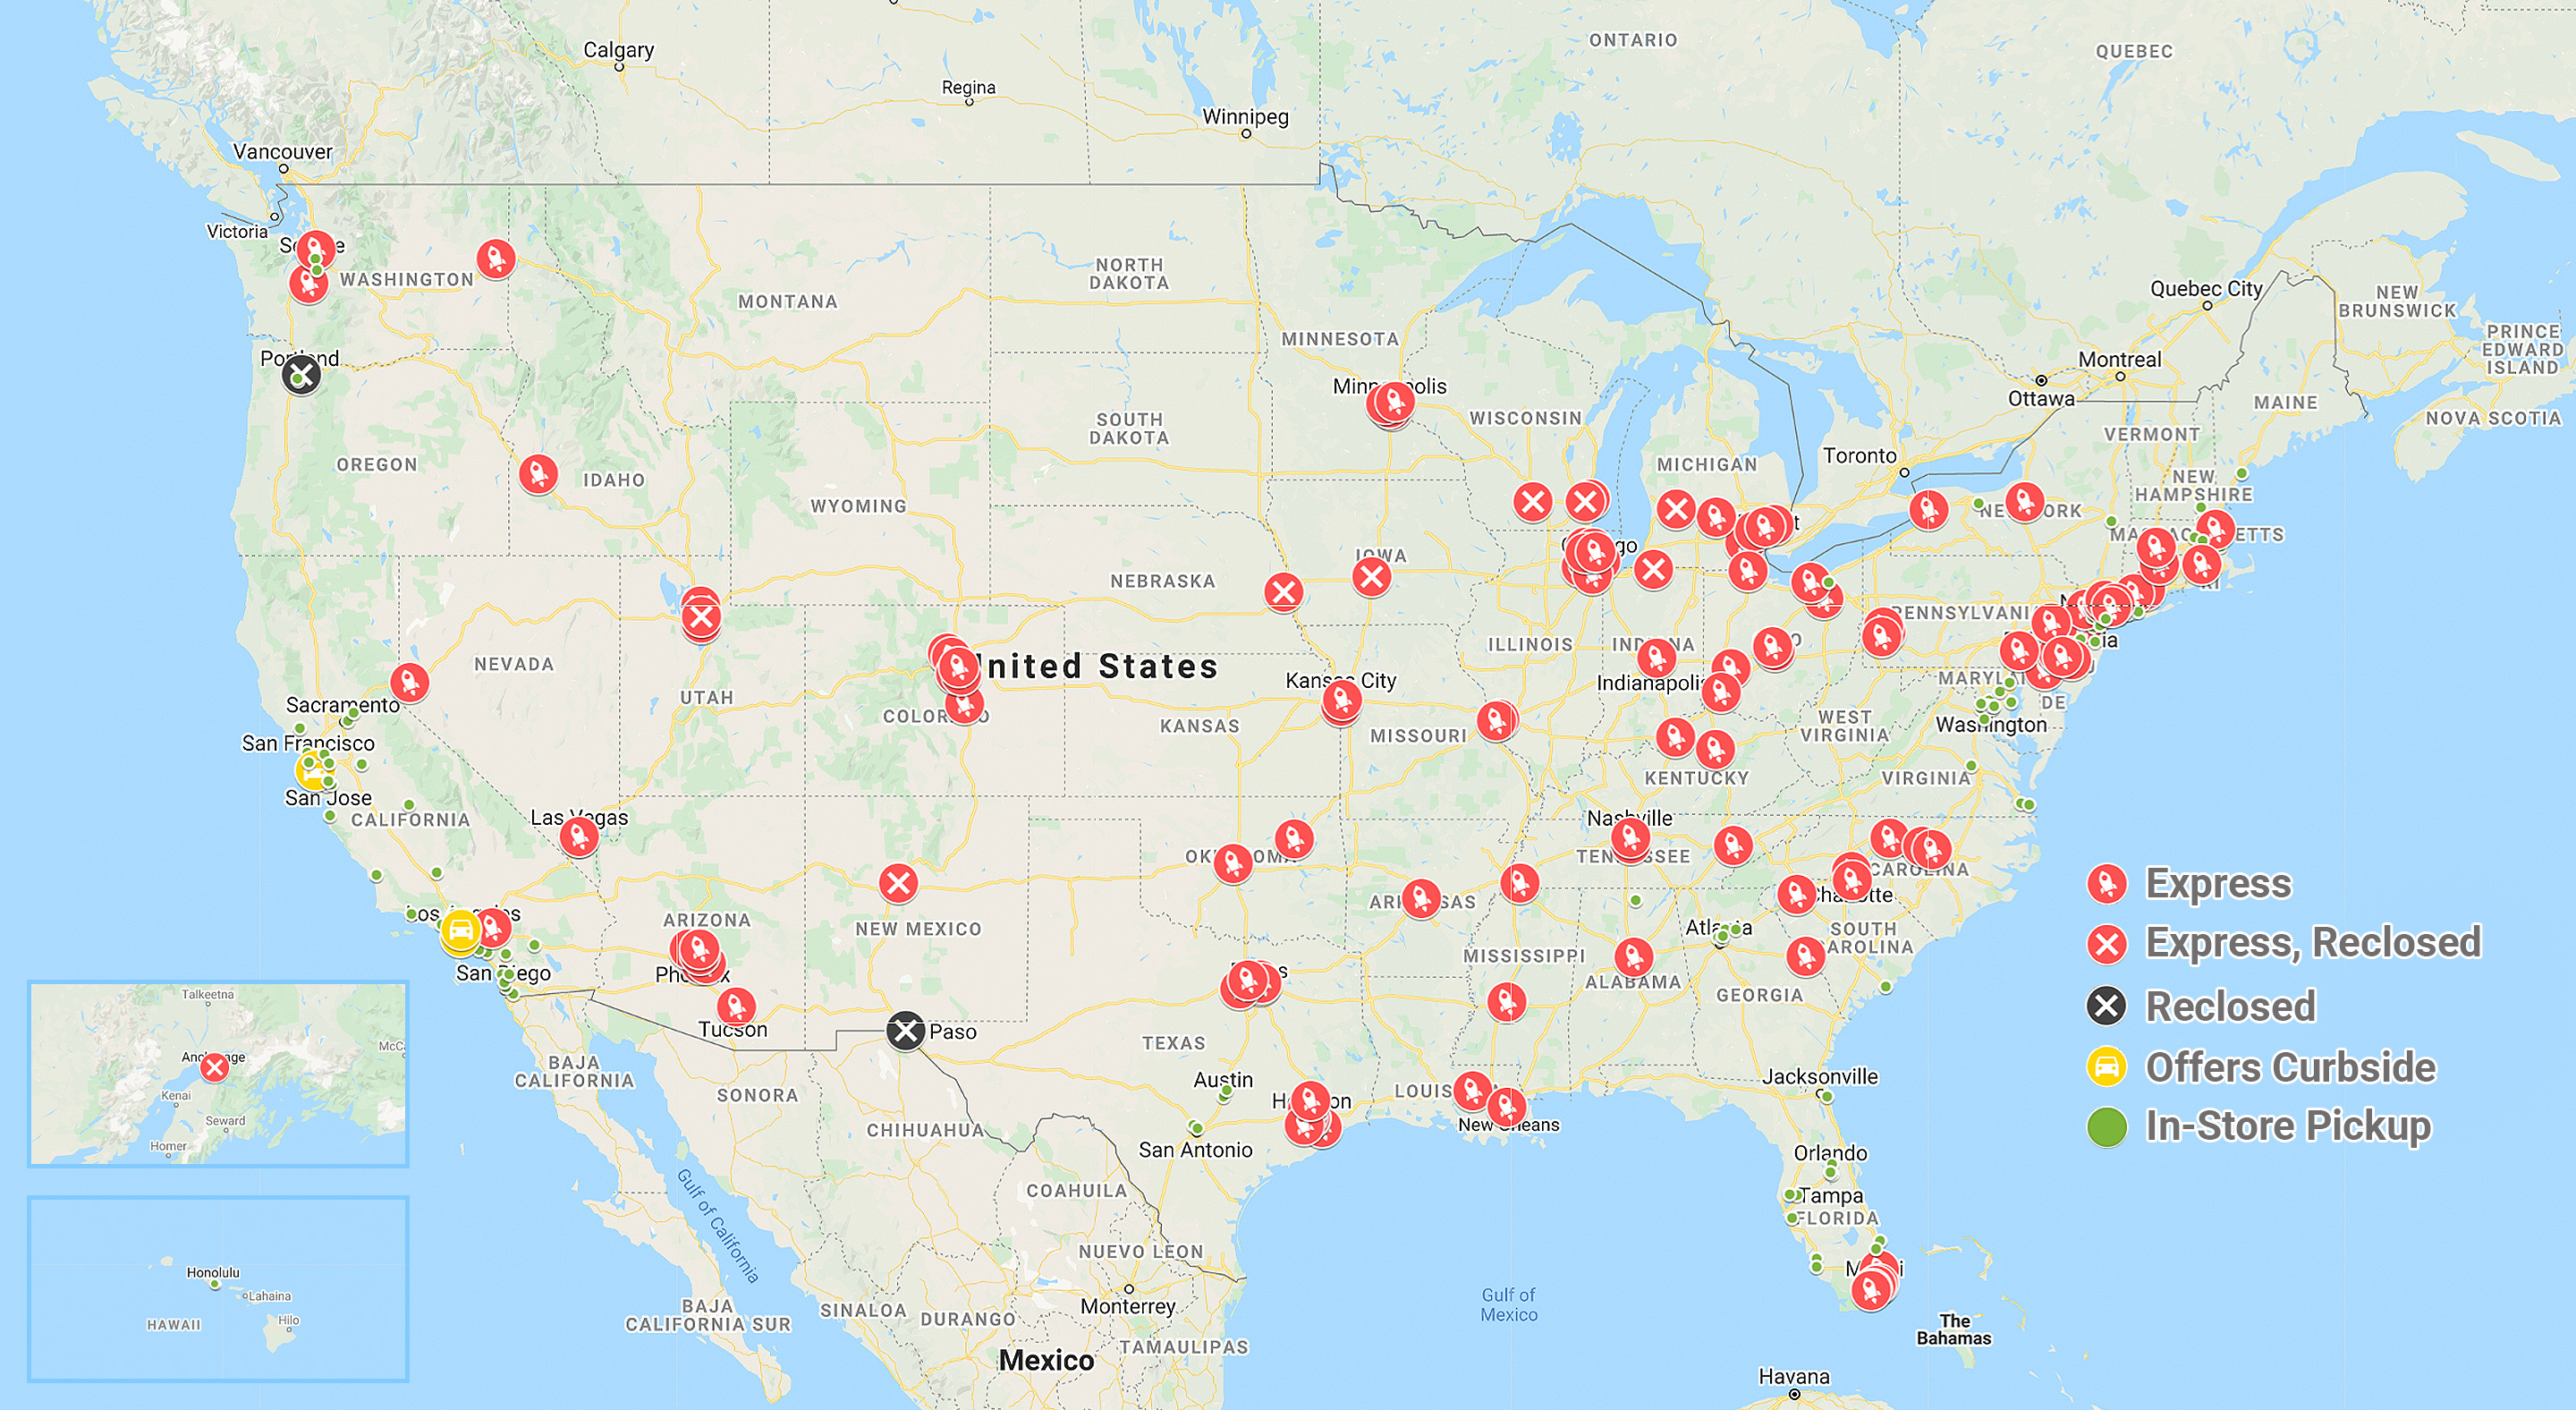 Following the Black Friday and Cyber Monday shopping weekend, 125 of 270 Apple retail stores in the US have switched to Express storefront pickups.